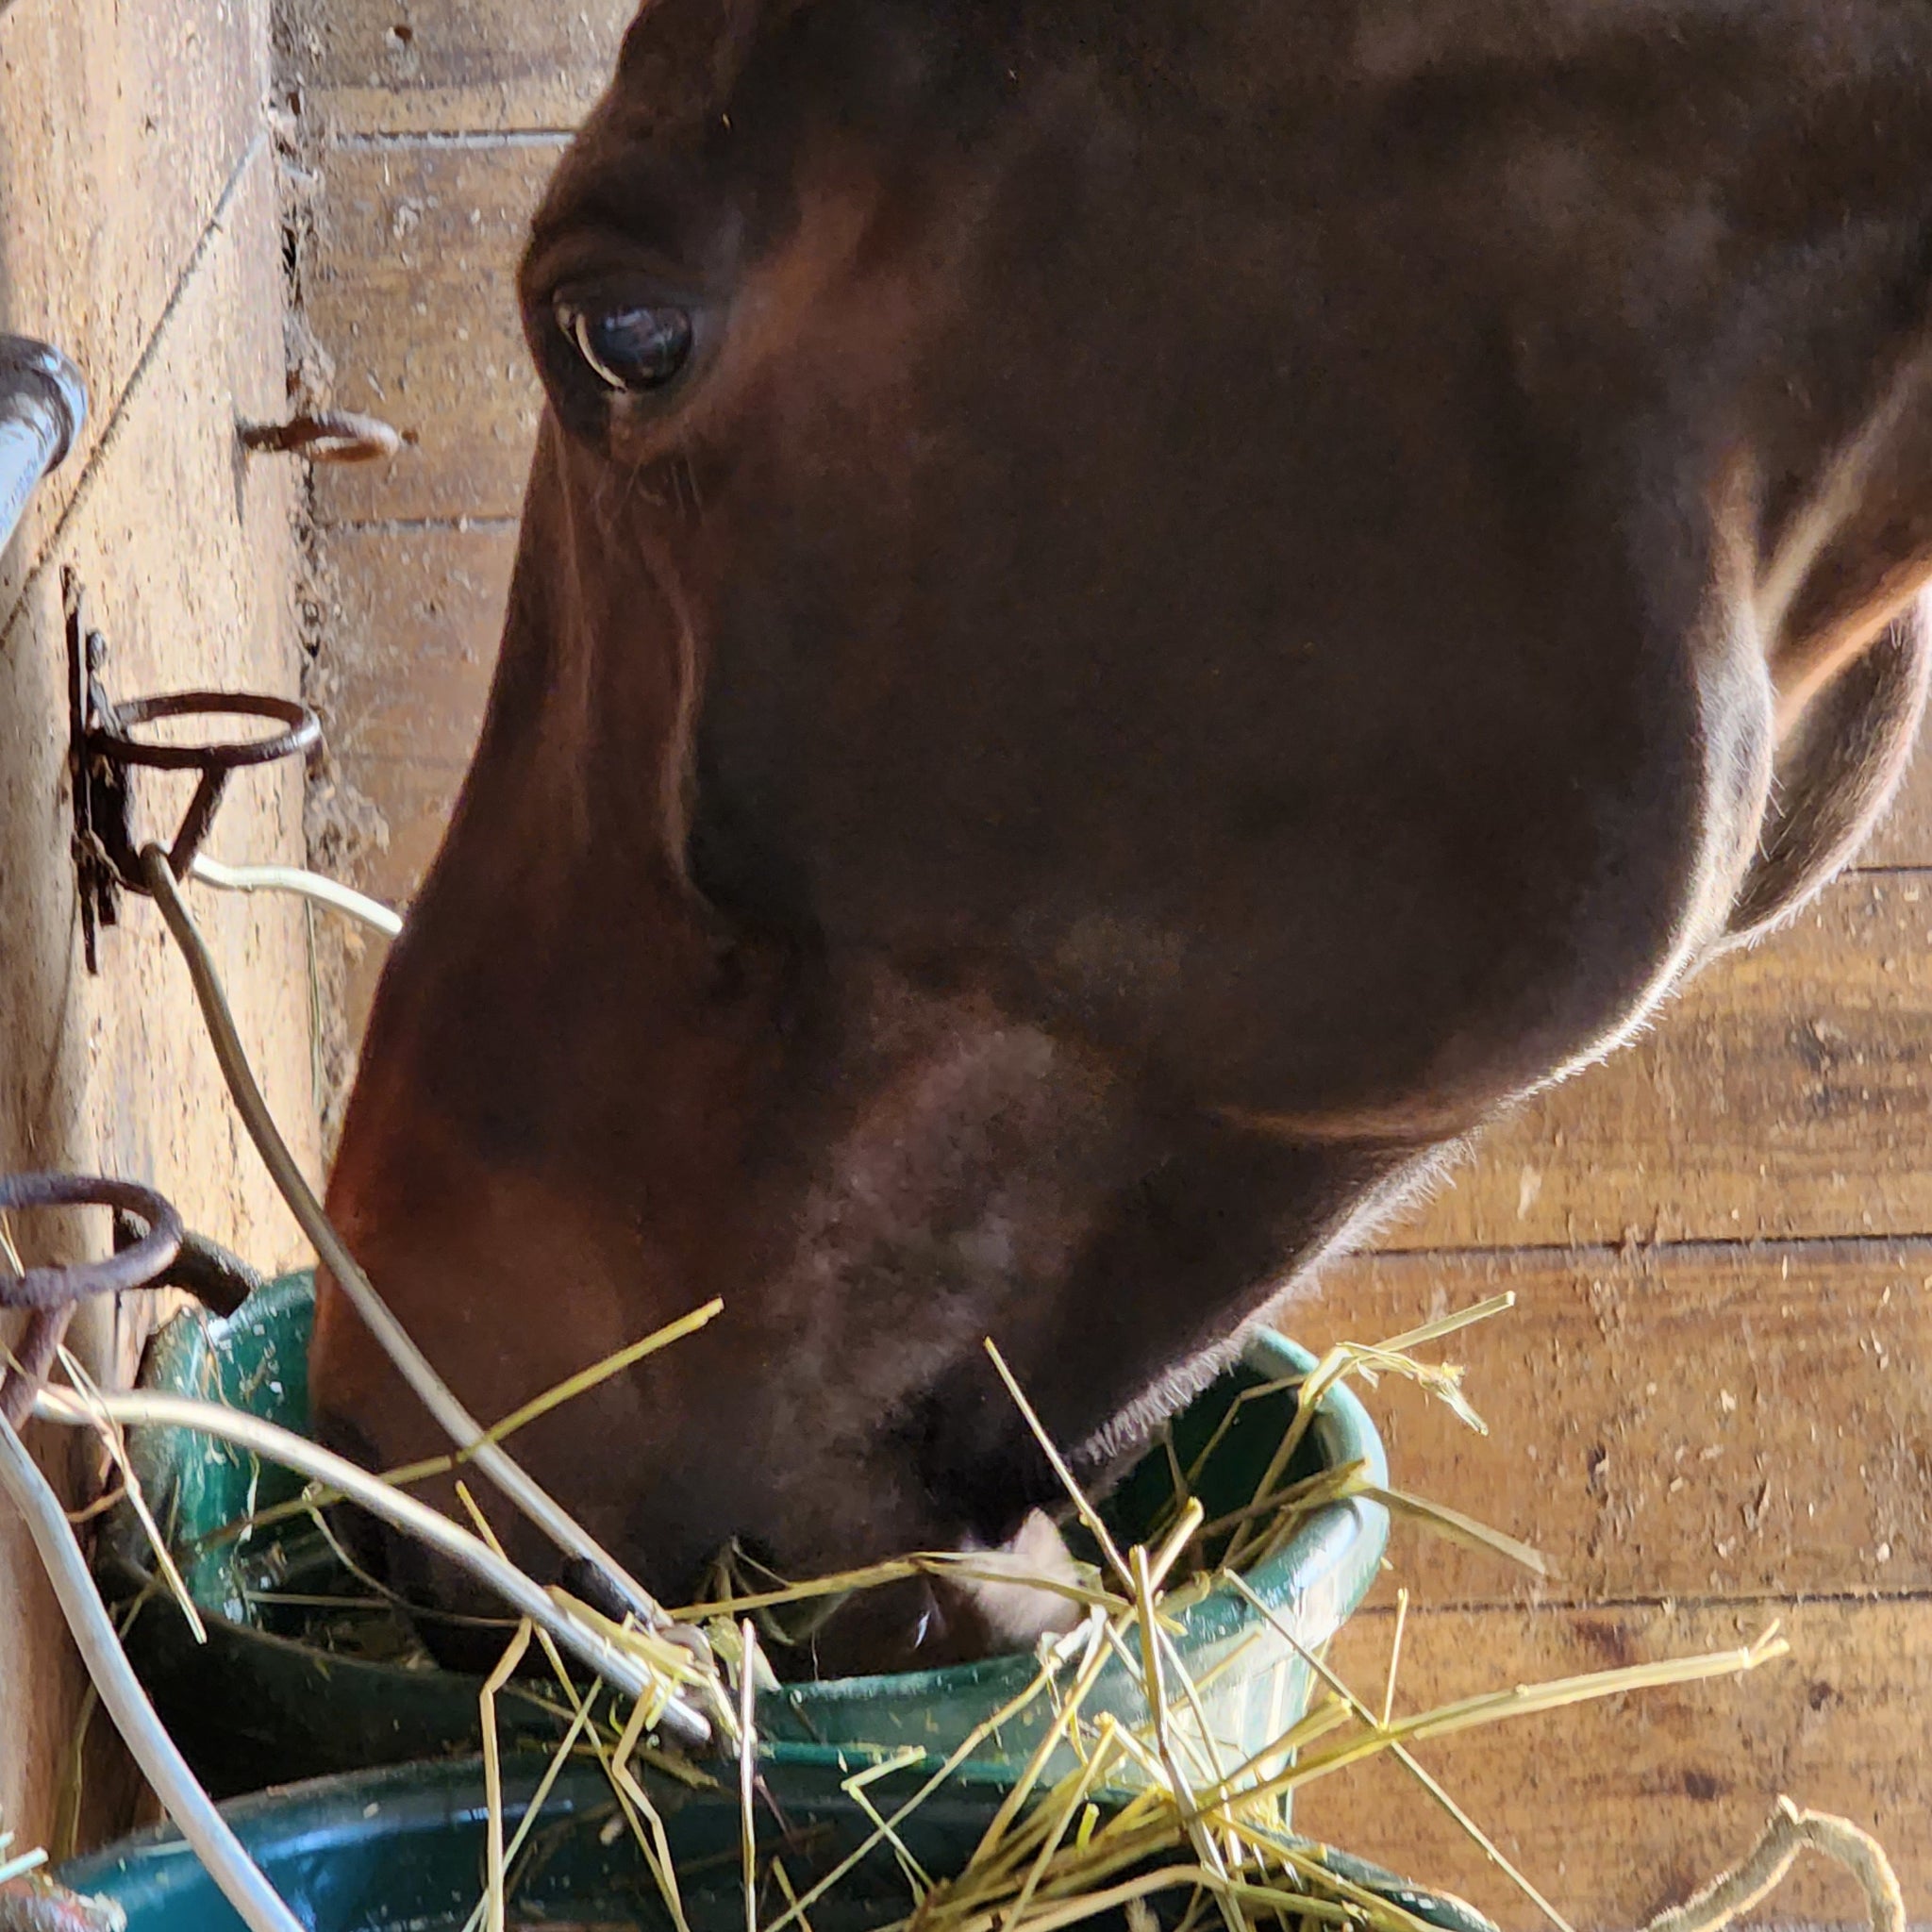 Horse drinking water from a bucket in a stall